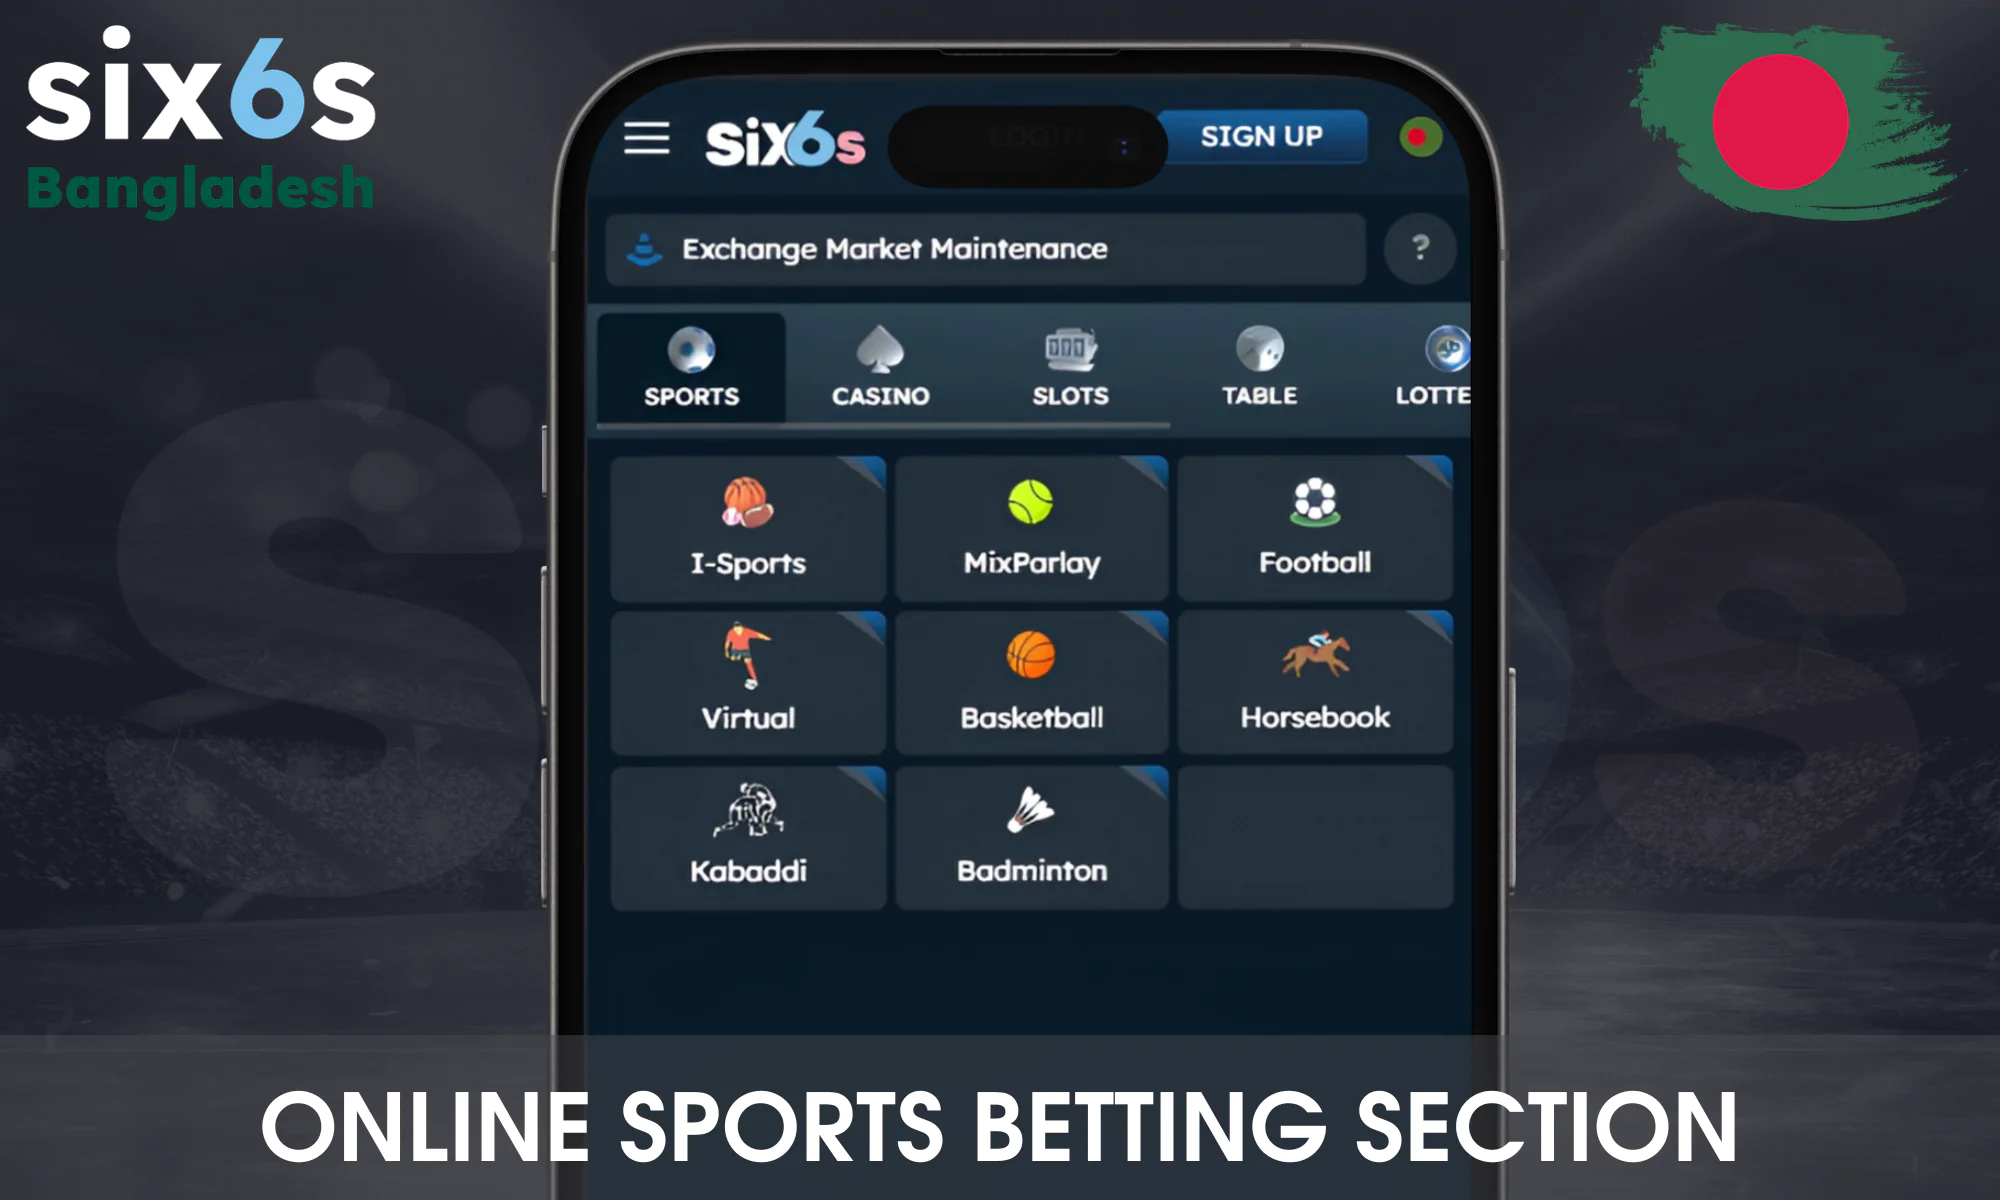 The Six6s section is designed for betting on sports events